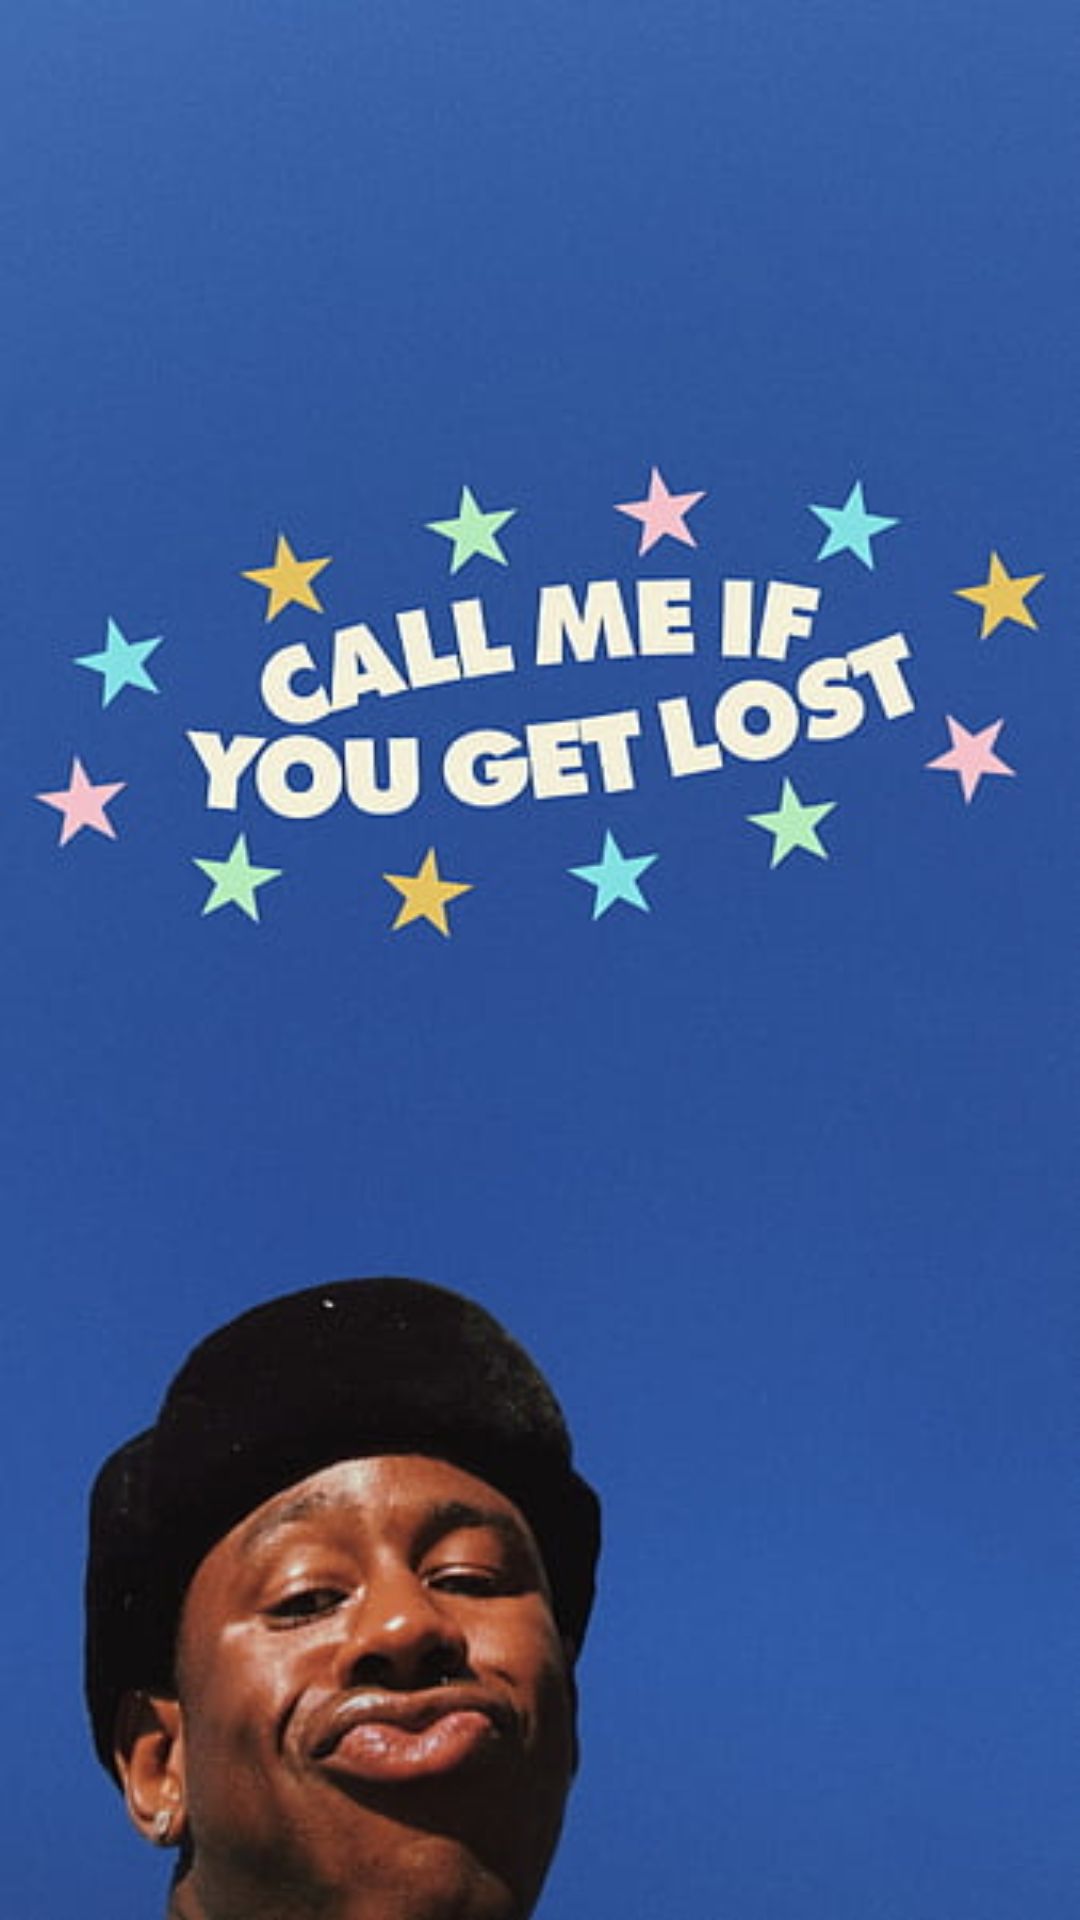 Cool Tyler The Creator Iphone Wallpapers